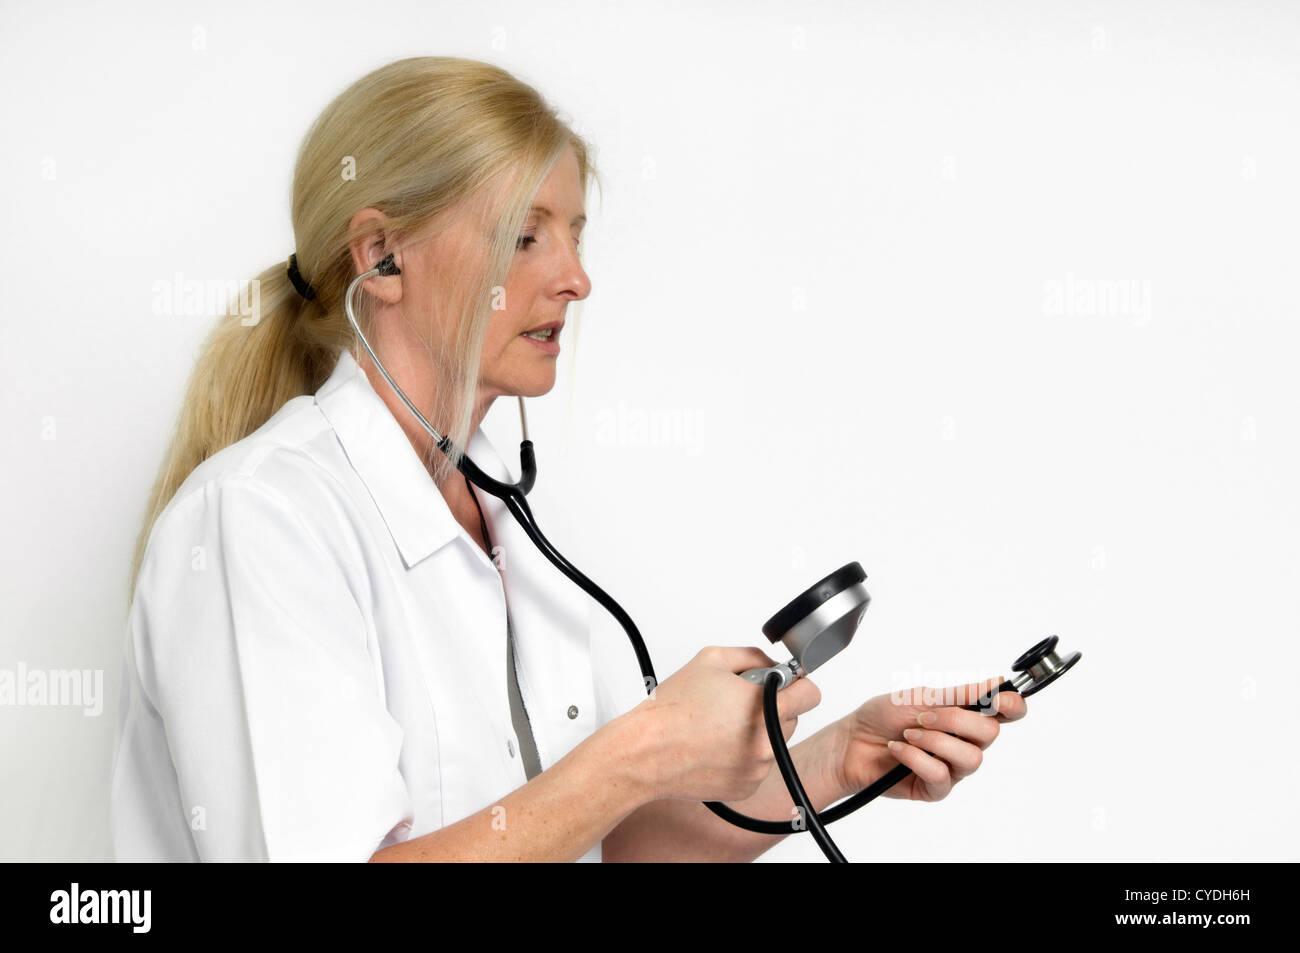 Caucasian woman with stethoscope and blood pressure monitor against a white background Stock Photo